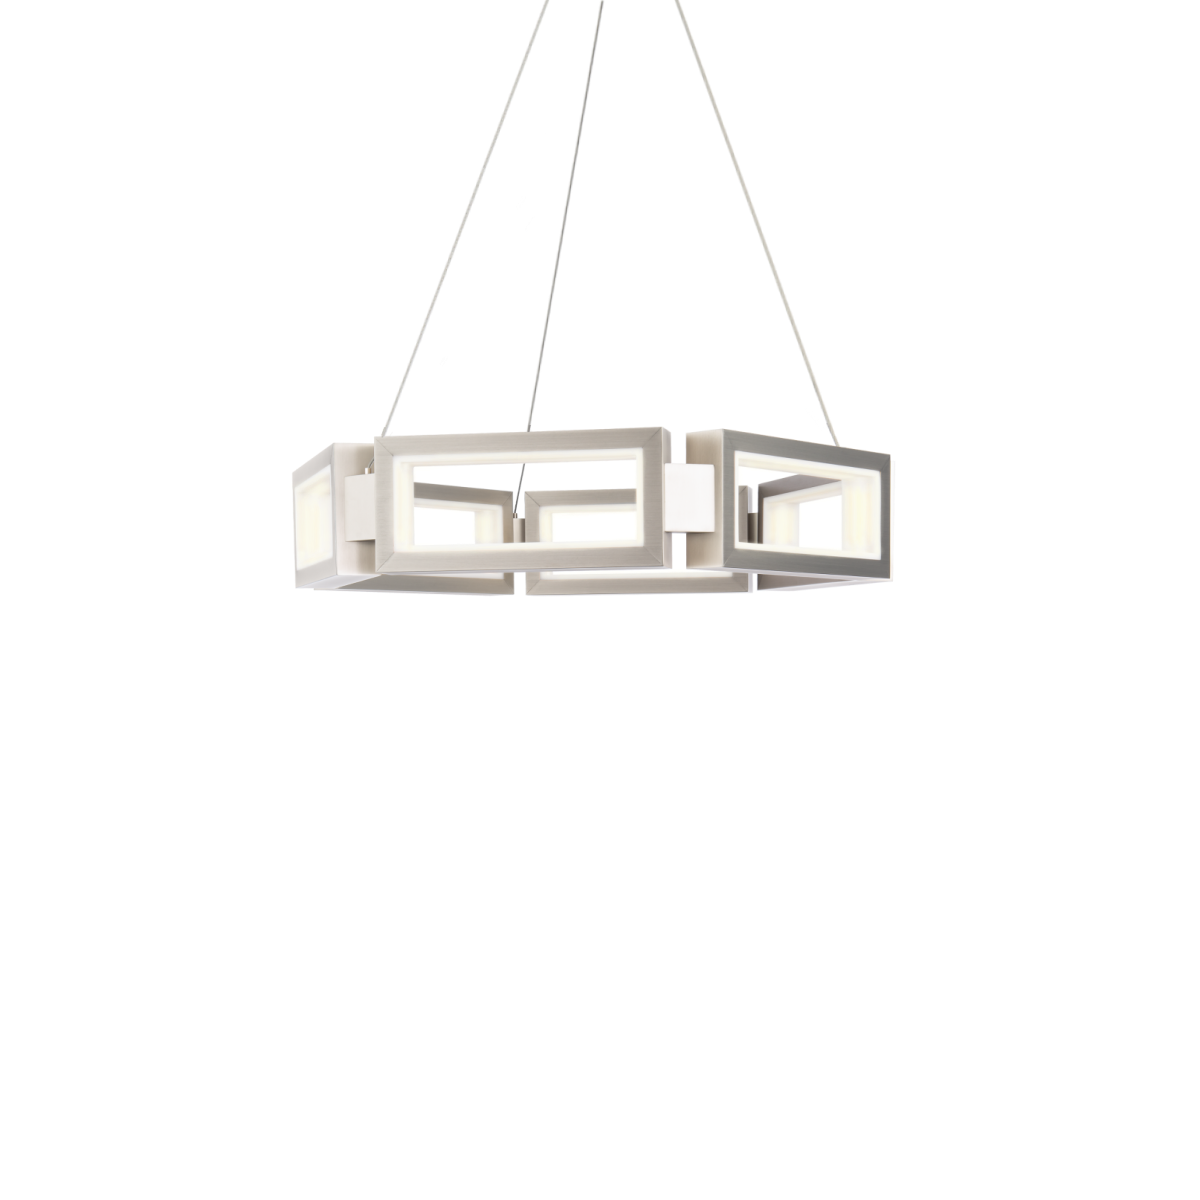 Modern Forms Mies Chandelier Light Chandeliers Modern Forms Brushed Nickel 23.875x26.375x5.125 